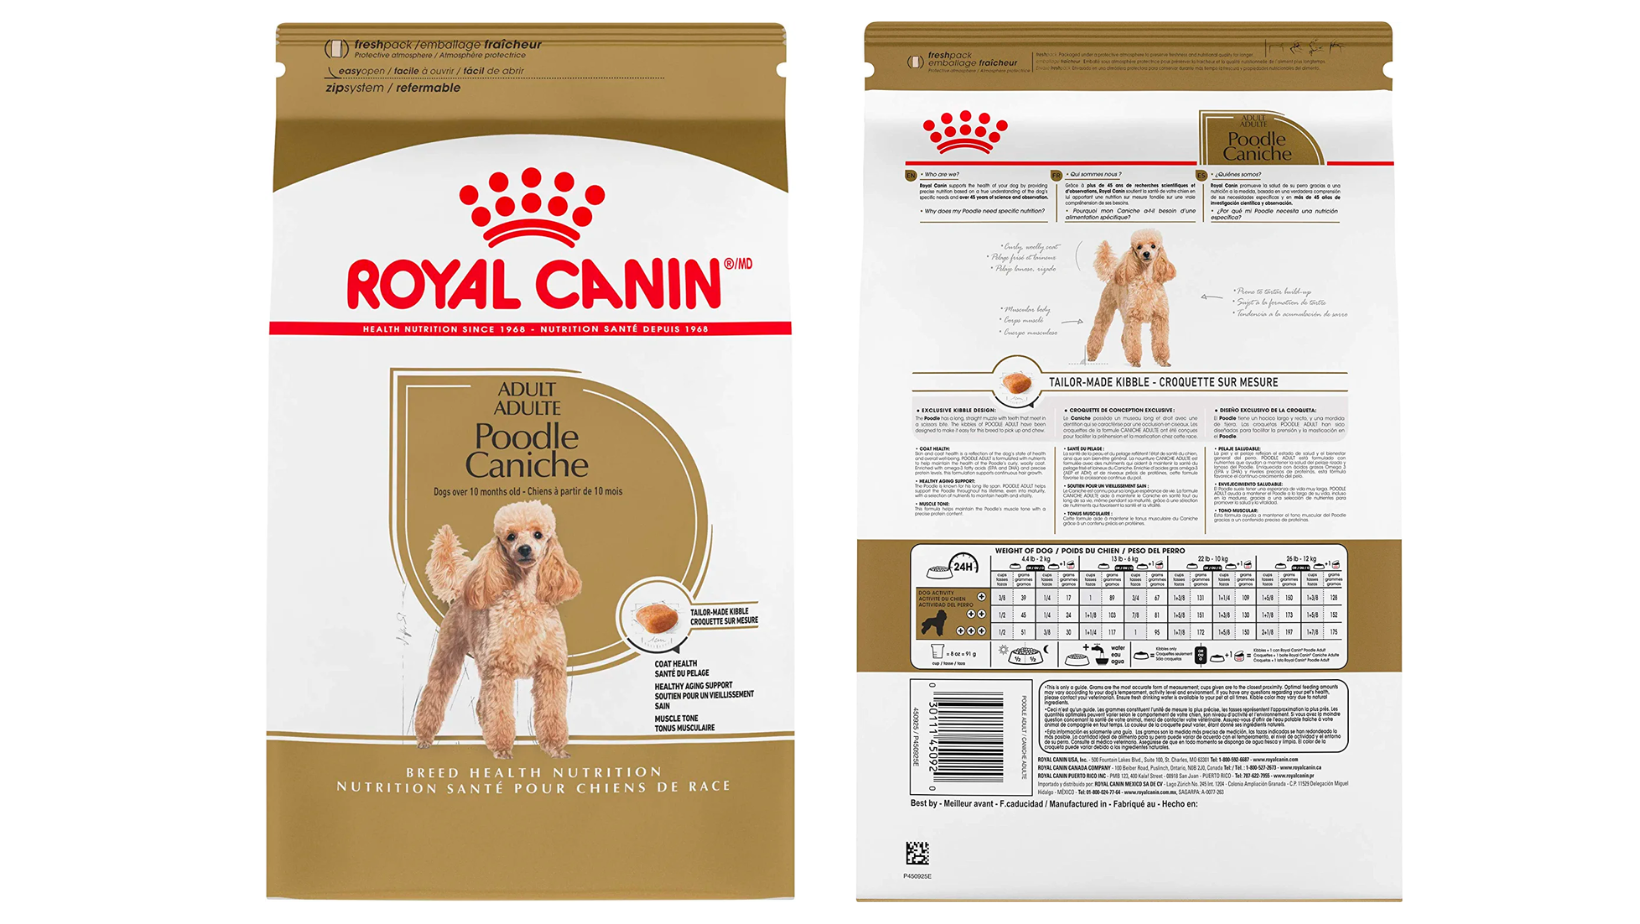 Royal Canin Toy Poodle Dry Dog Food